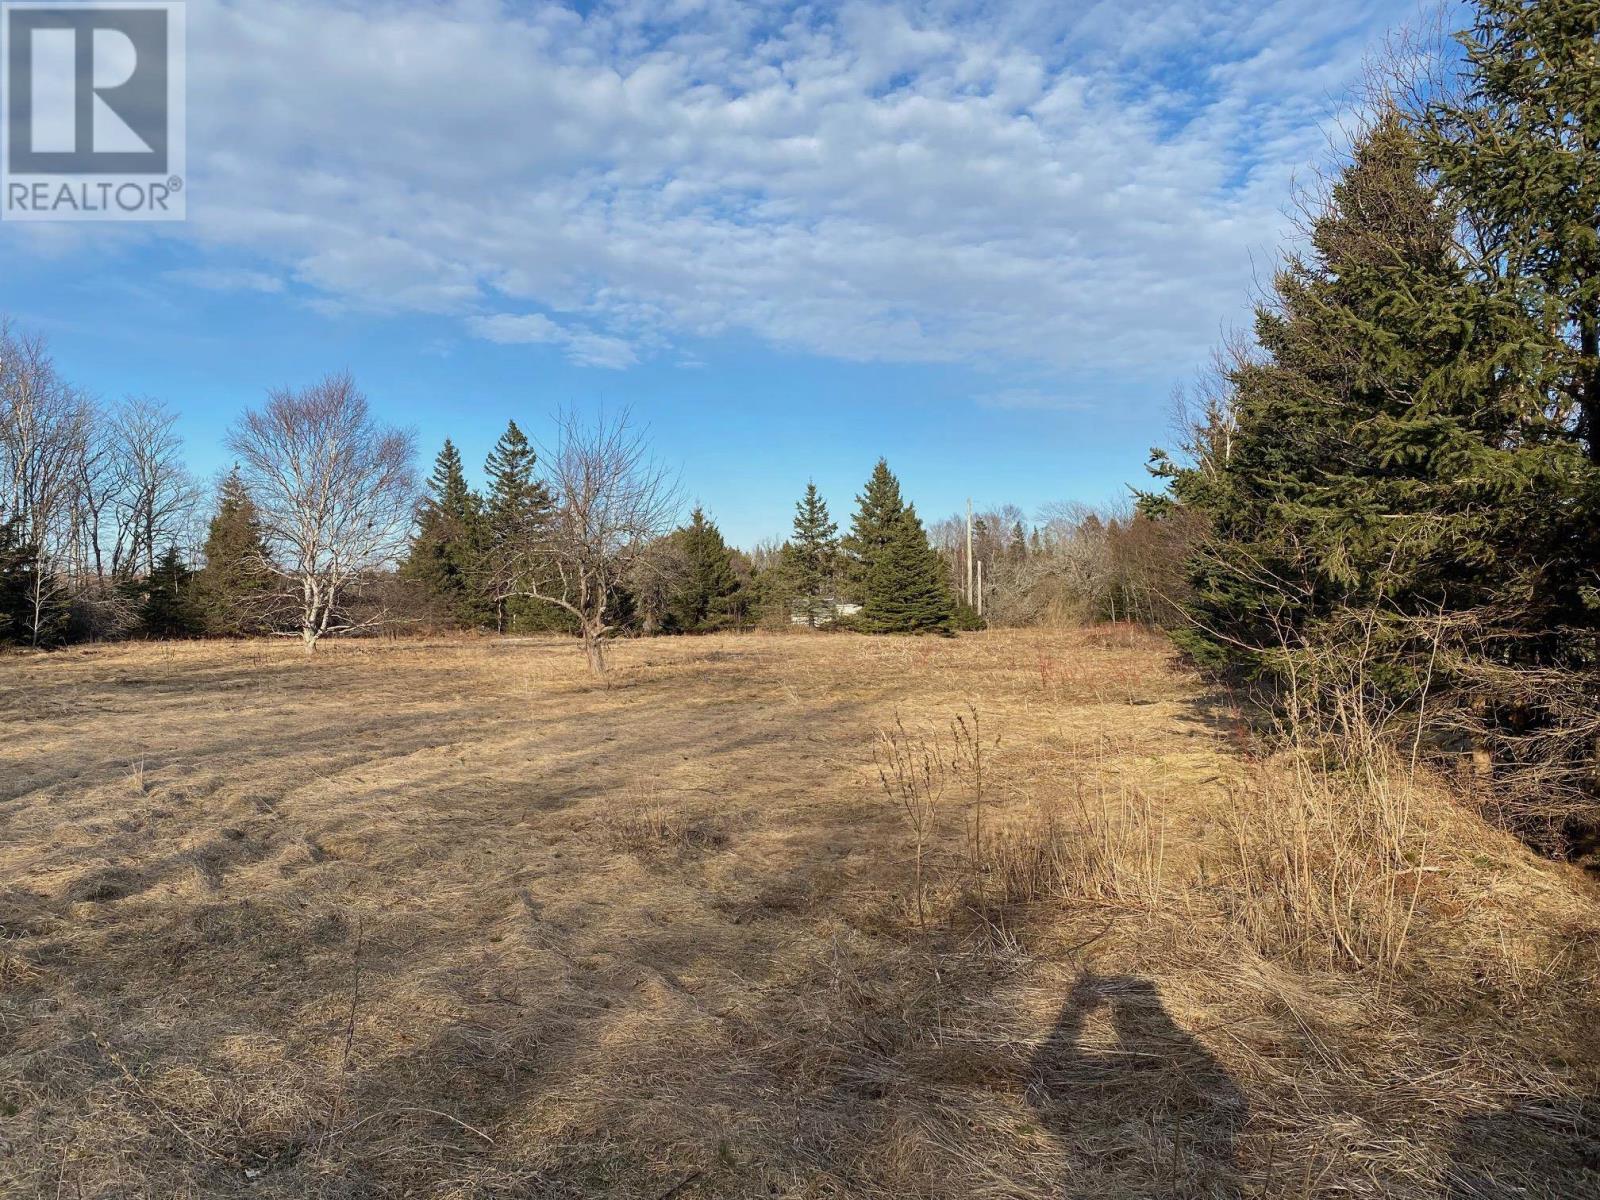 Vacant Land For Sale | Lot 1 Mount Tryon Road | Mount Tryon | C0B1A0